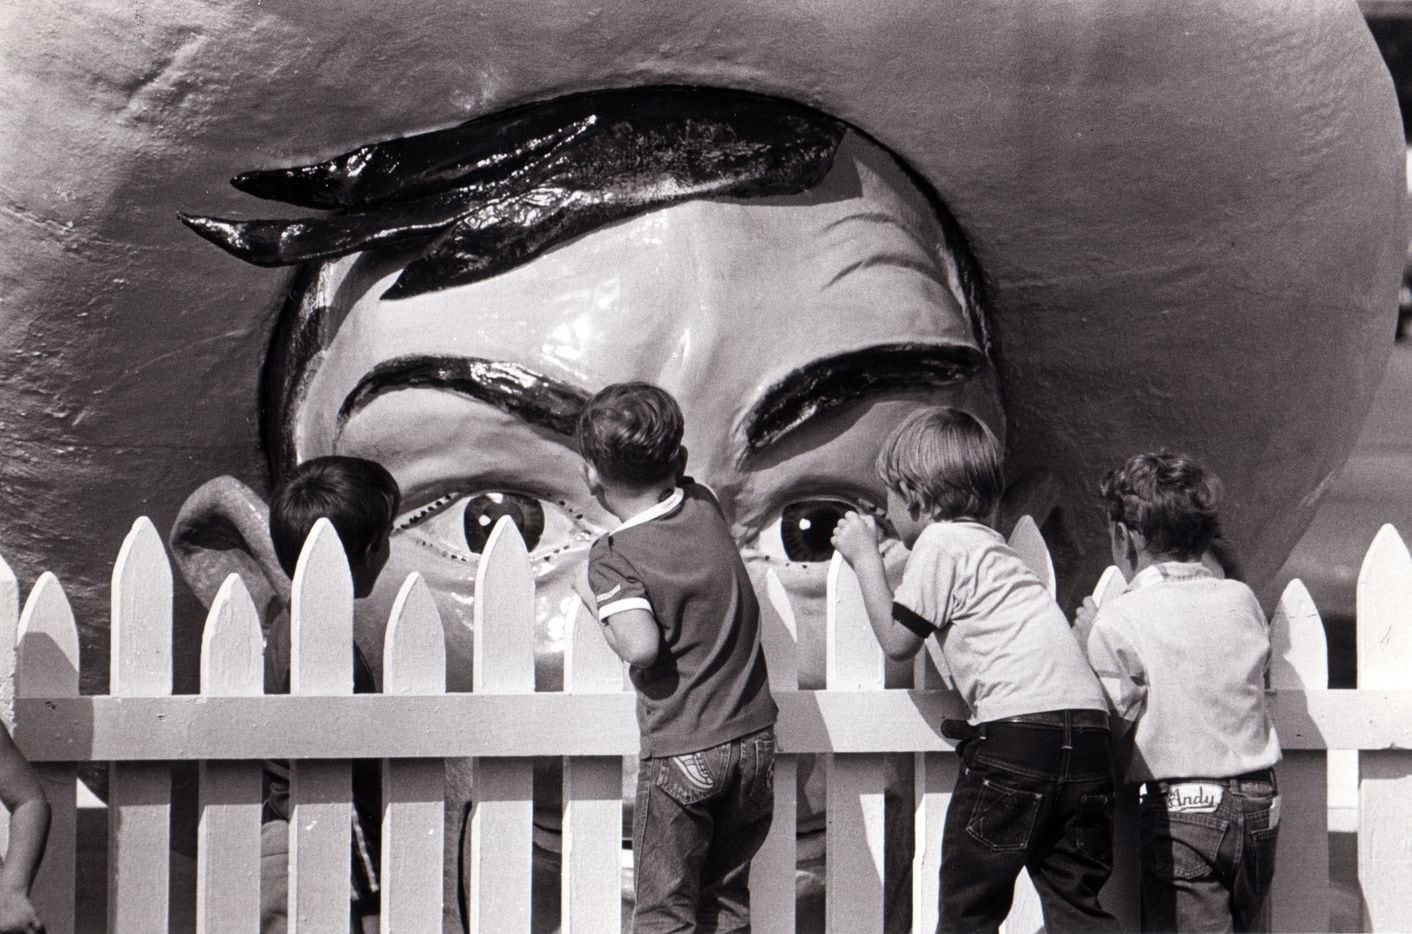 Big Tex peeks over the fence as he's assembled in 1981.